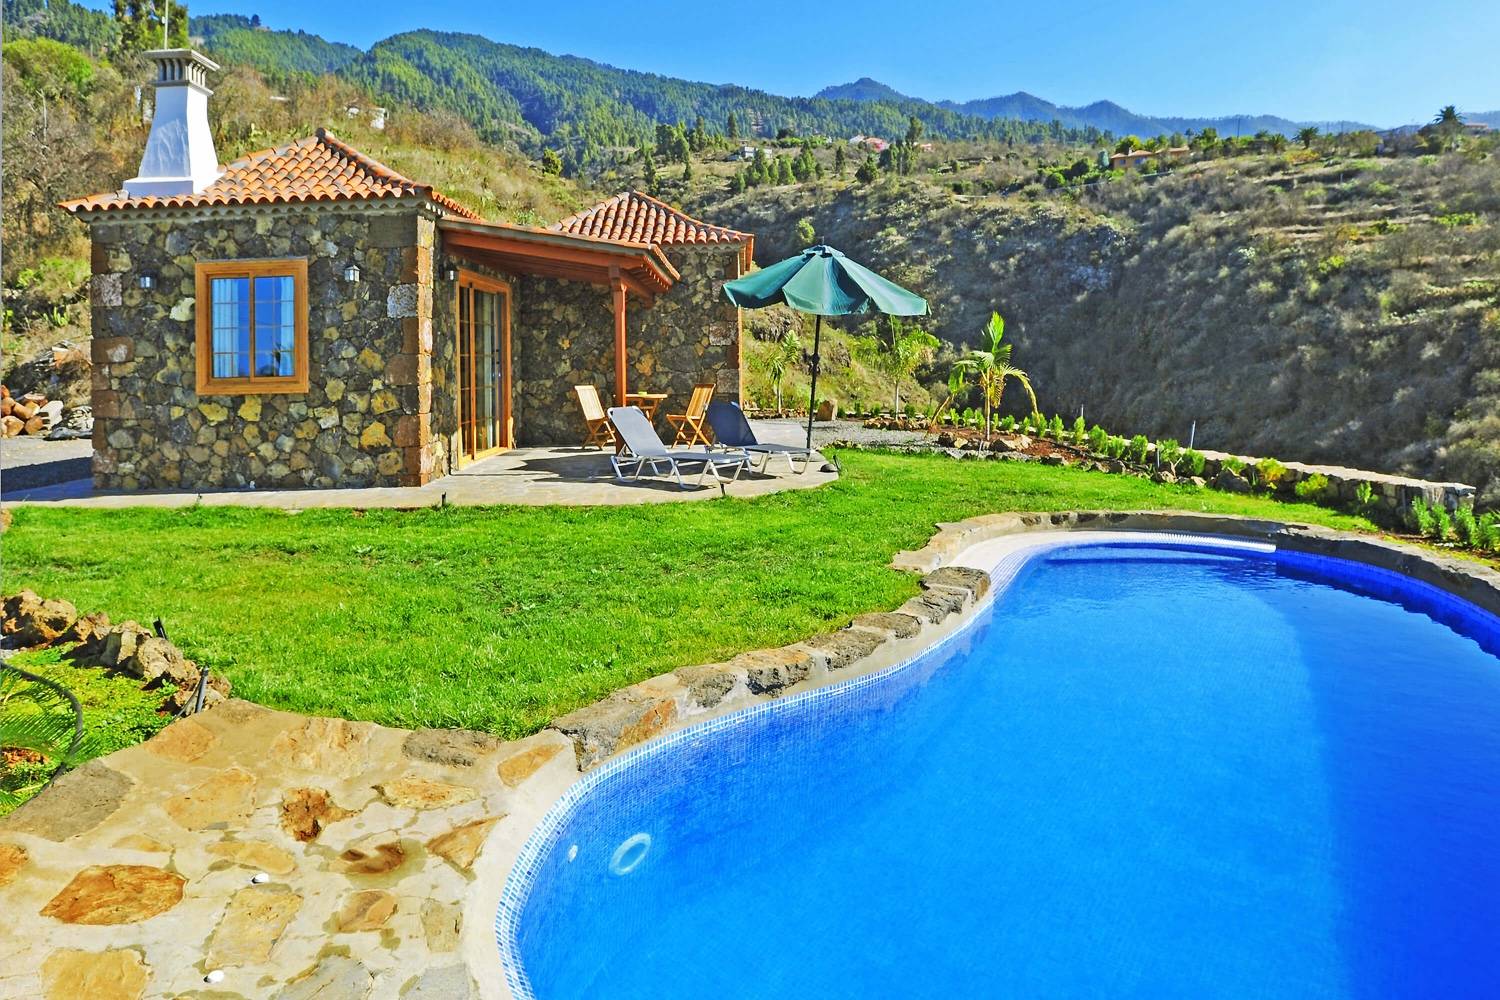 Beautiful holiday house to rent furnished with high quality materials, a private pool with in a rural location with views to the mountains and sea